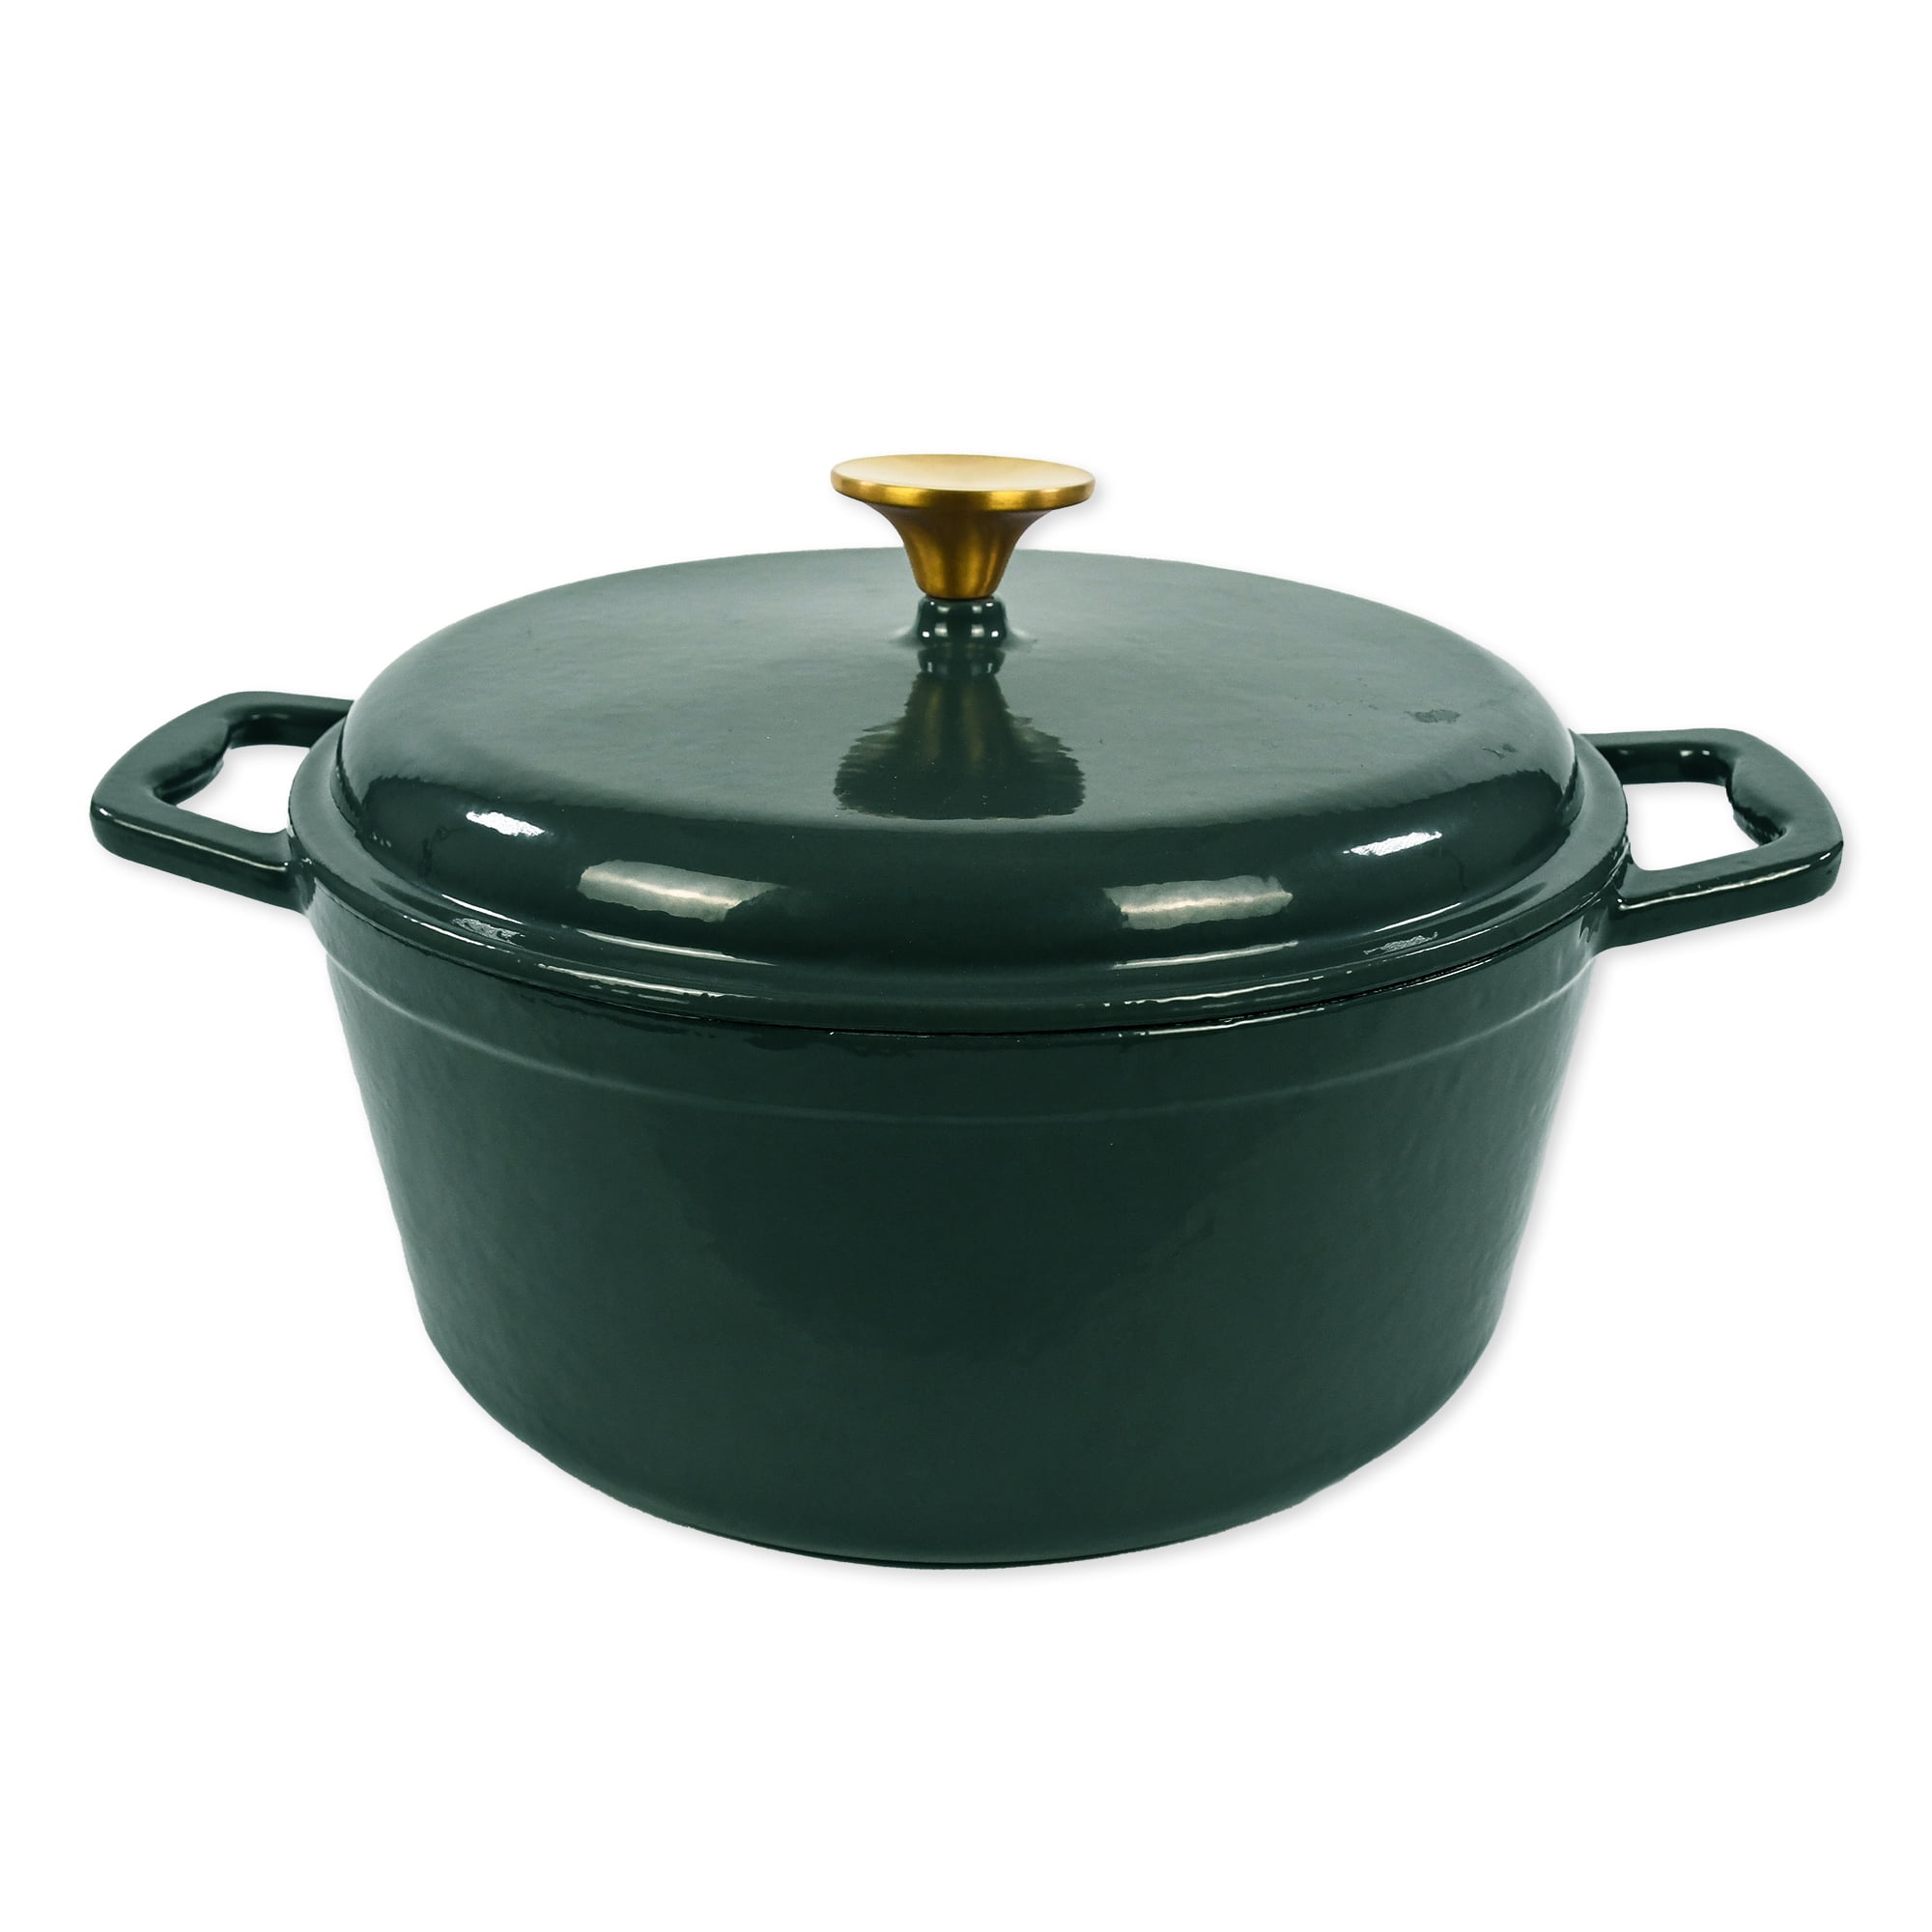 Extra large Cast iron dutch oven by American